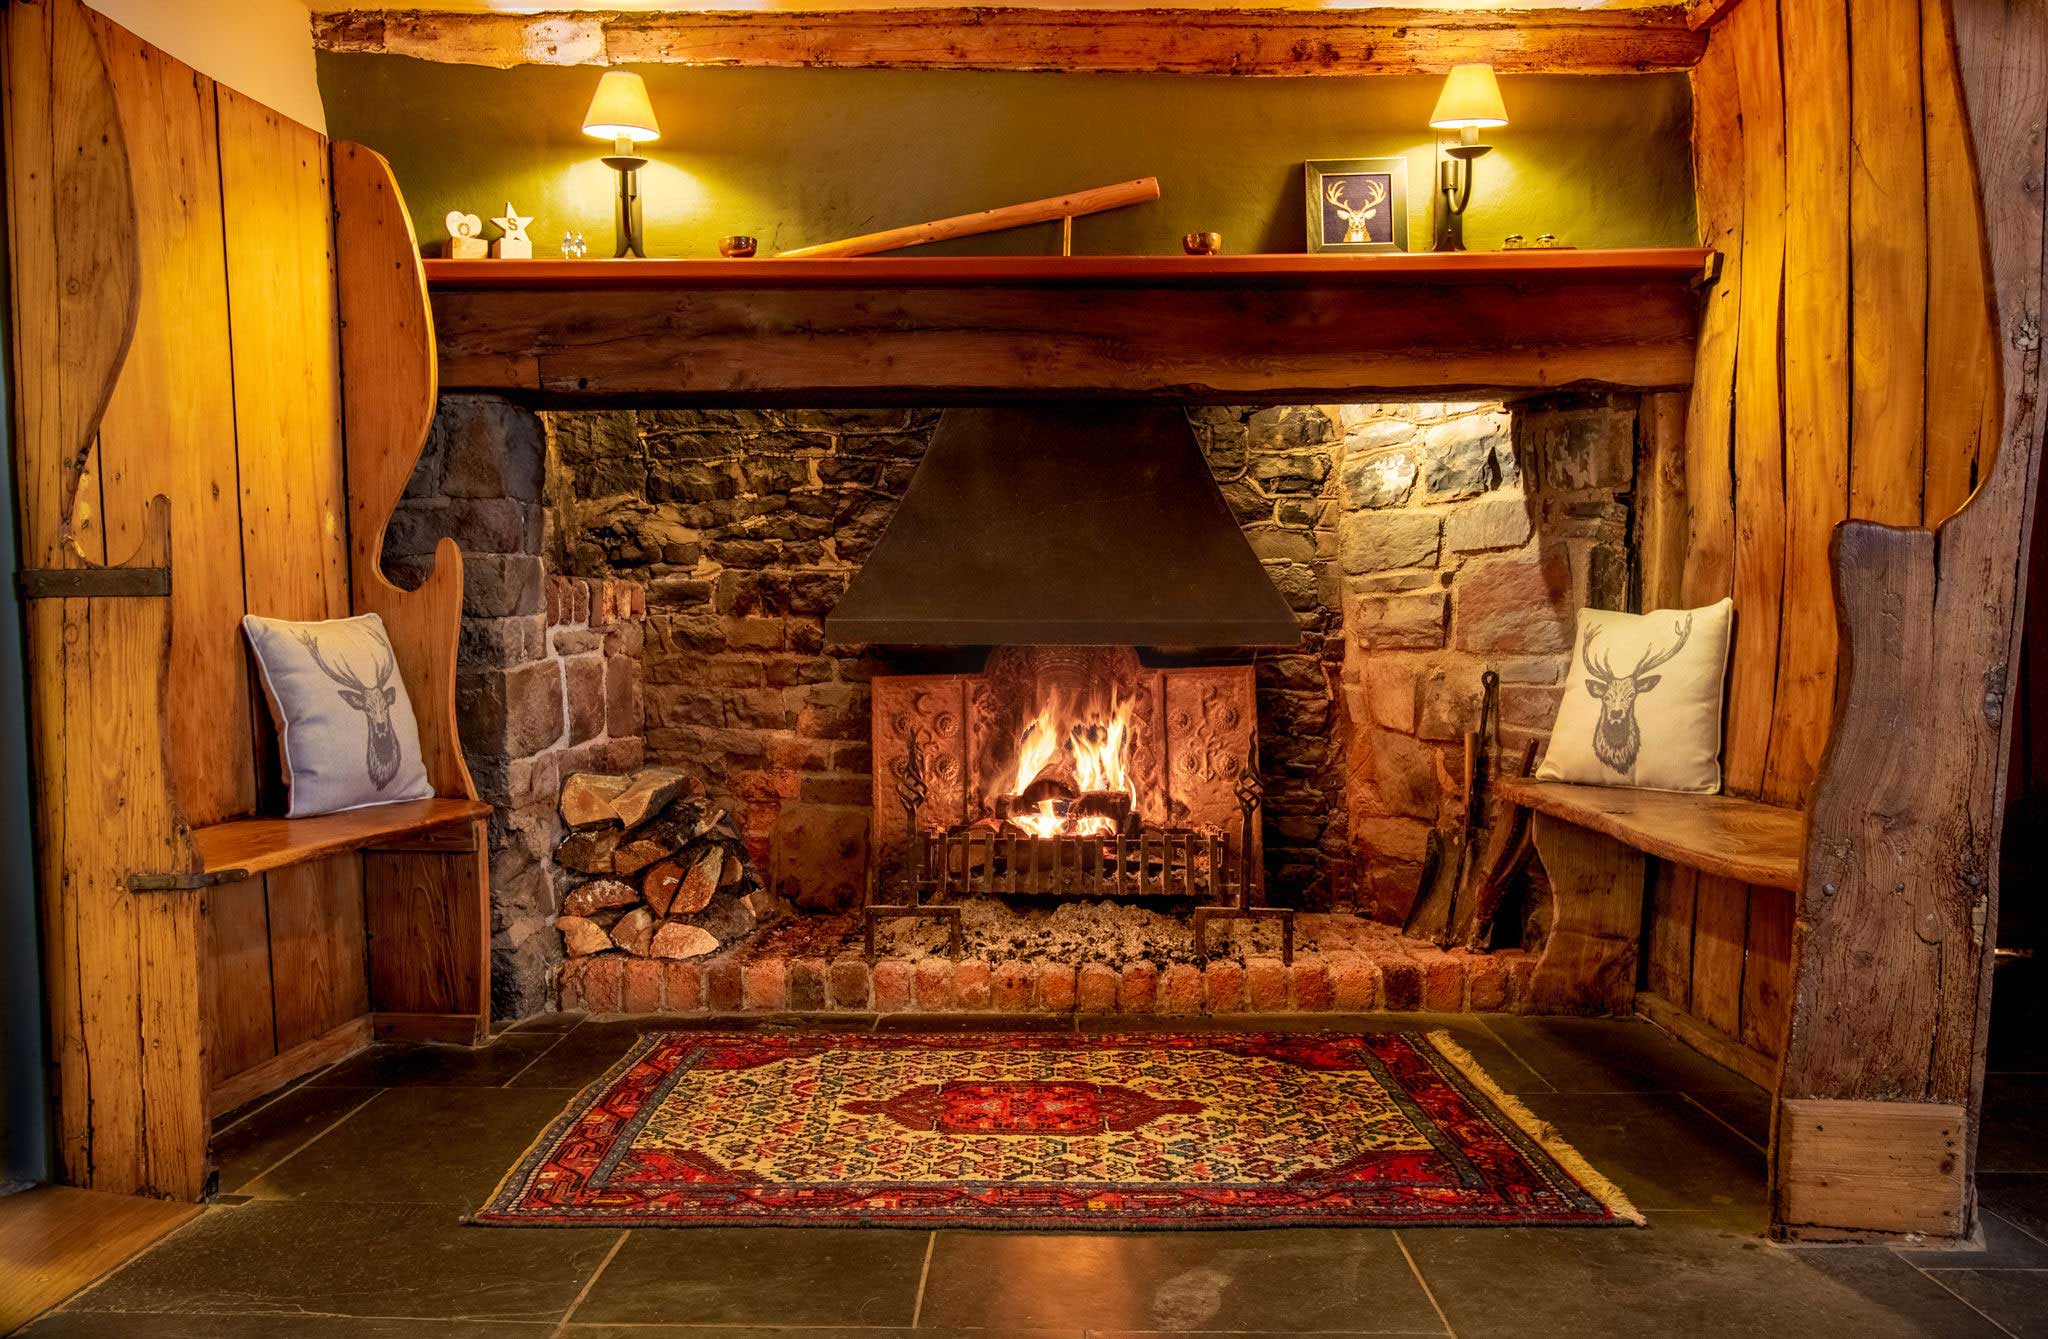 The Stag warm fireplace